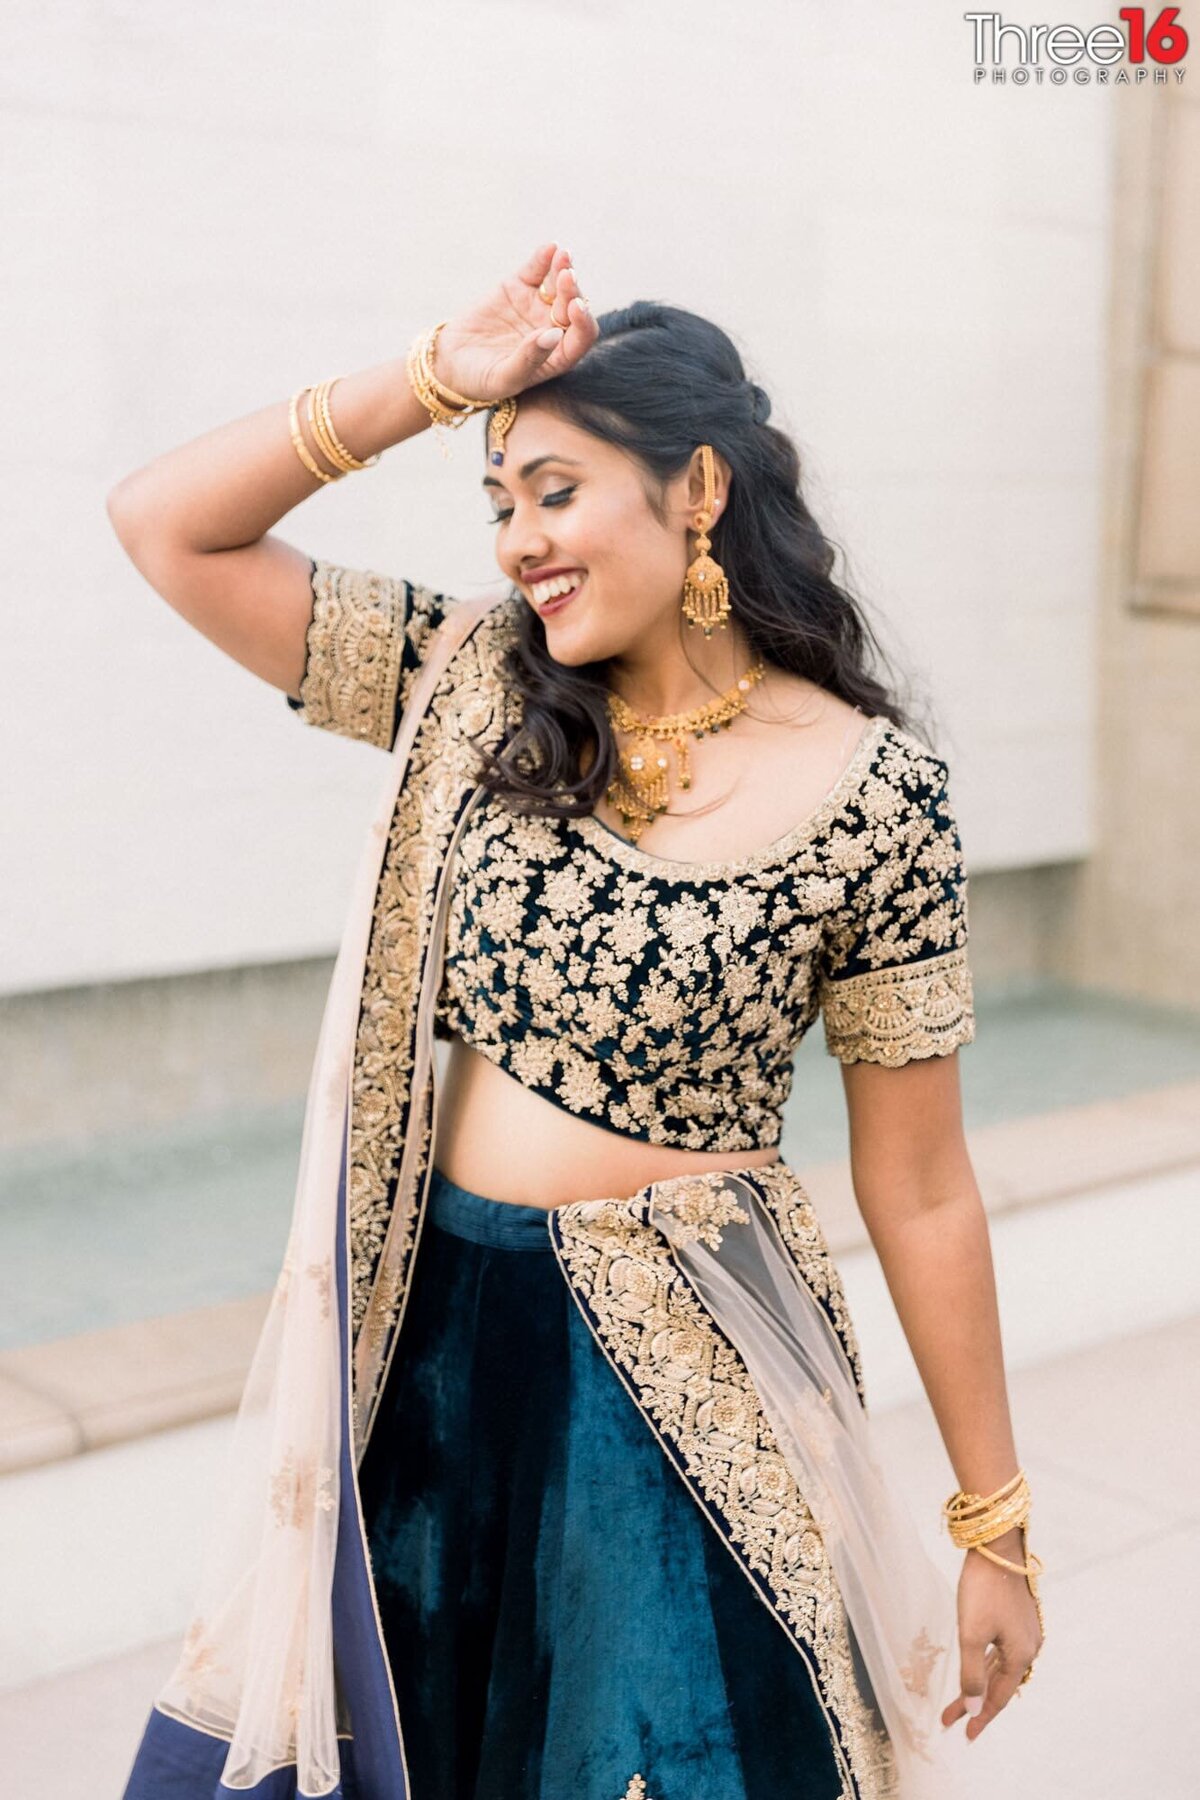 Indian Bride has fun during her photo shoot after the ceremony